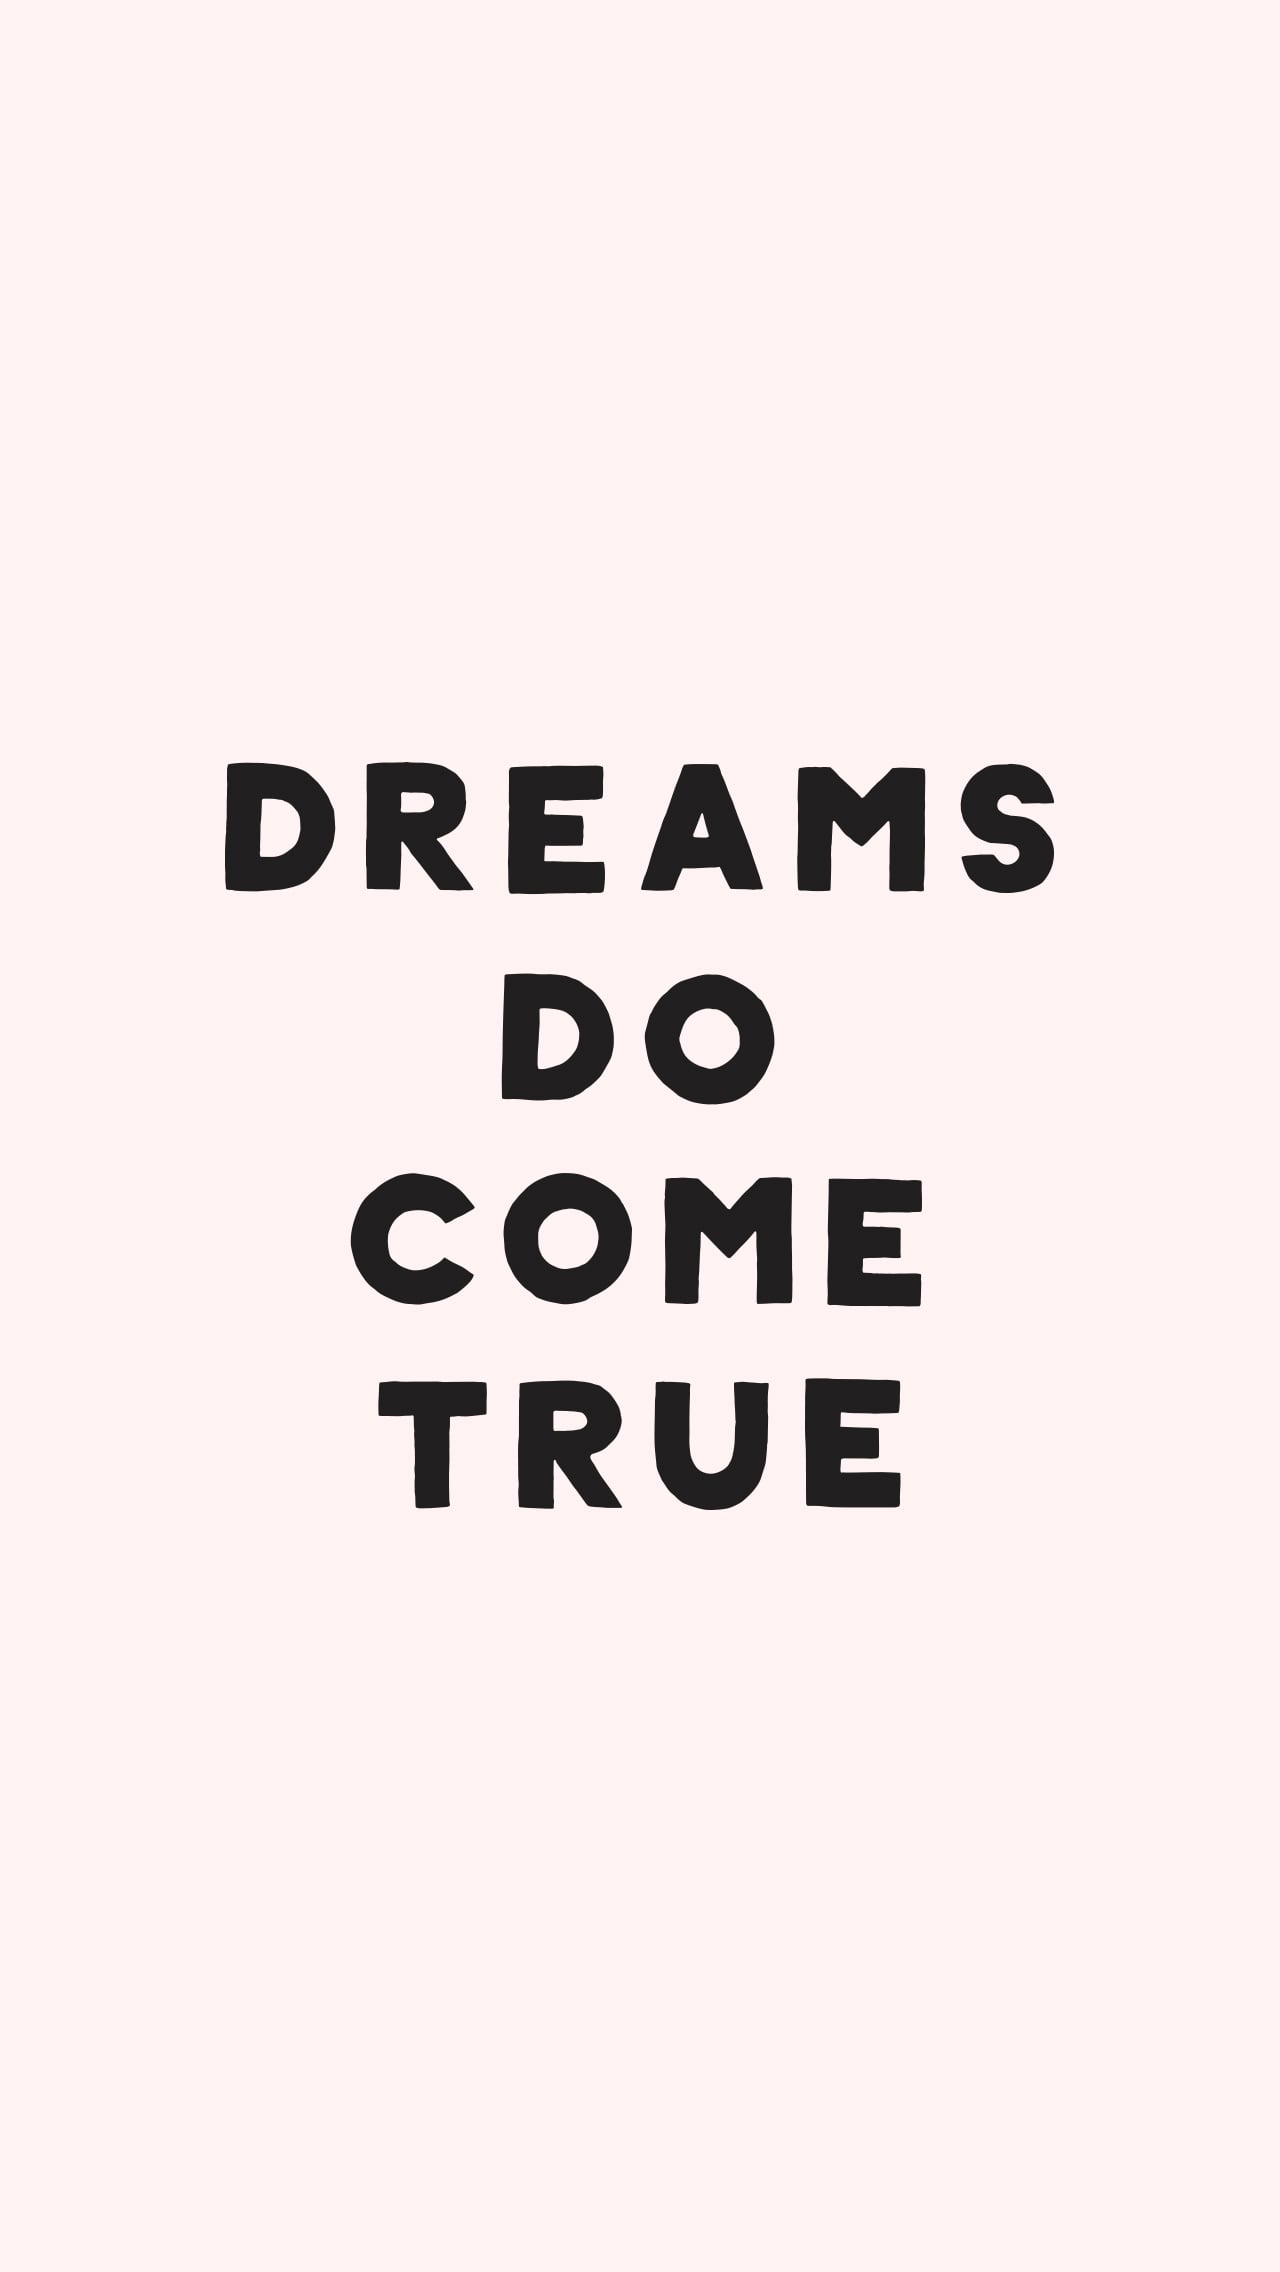 Dreams Do Come True 35 Free And Fun Iphone Wallpapers To Liven Up Your Life Popsugar Tech Photo 2